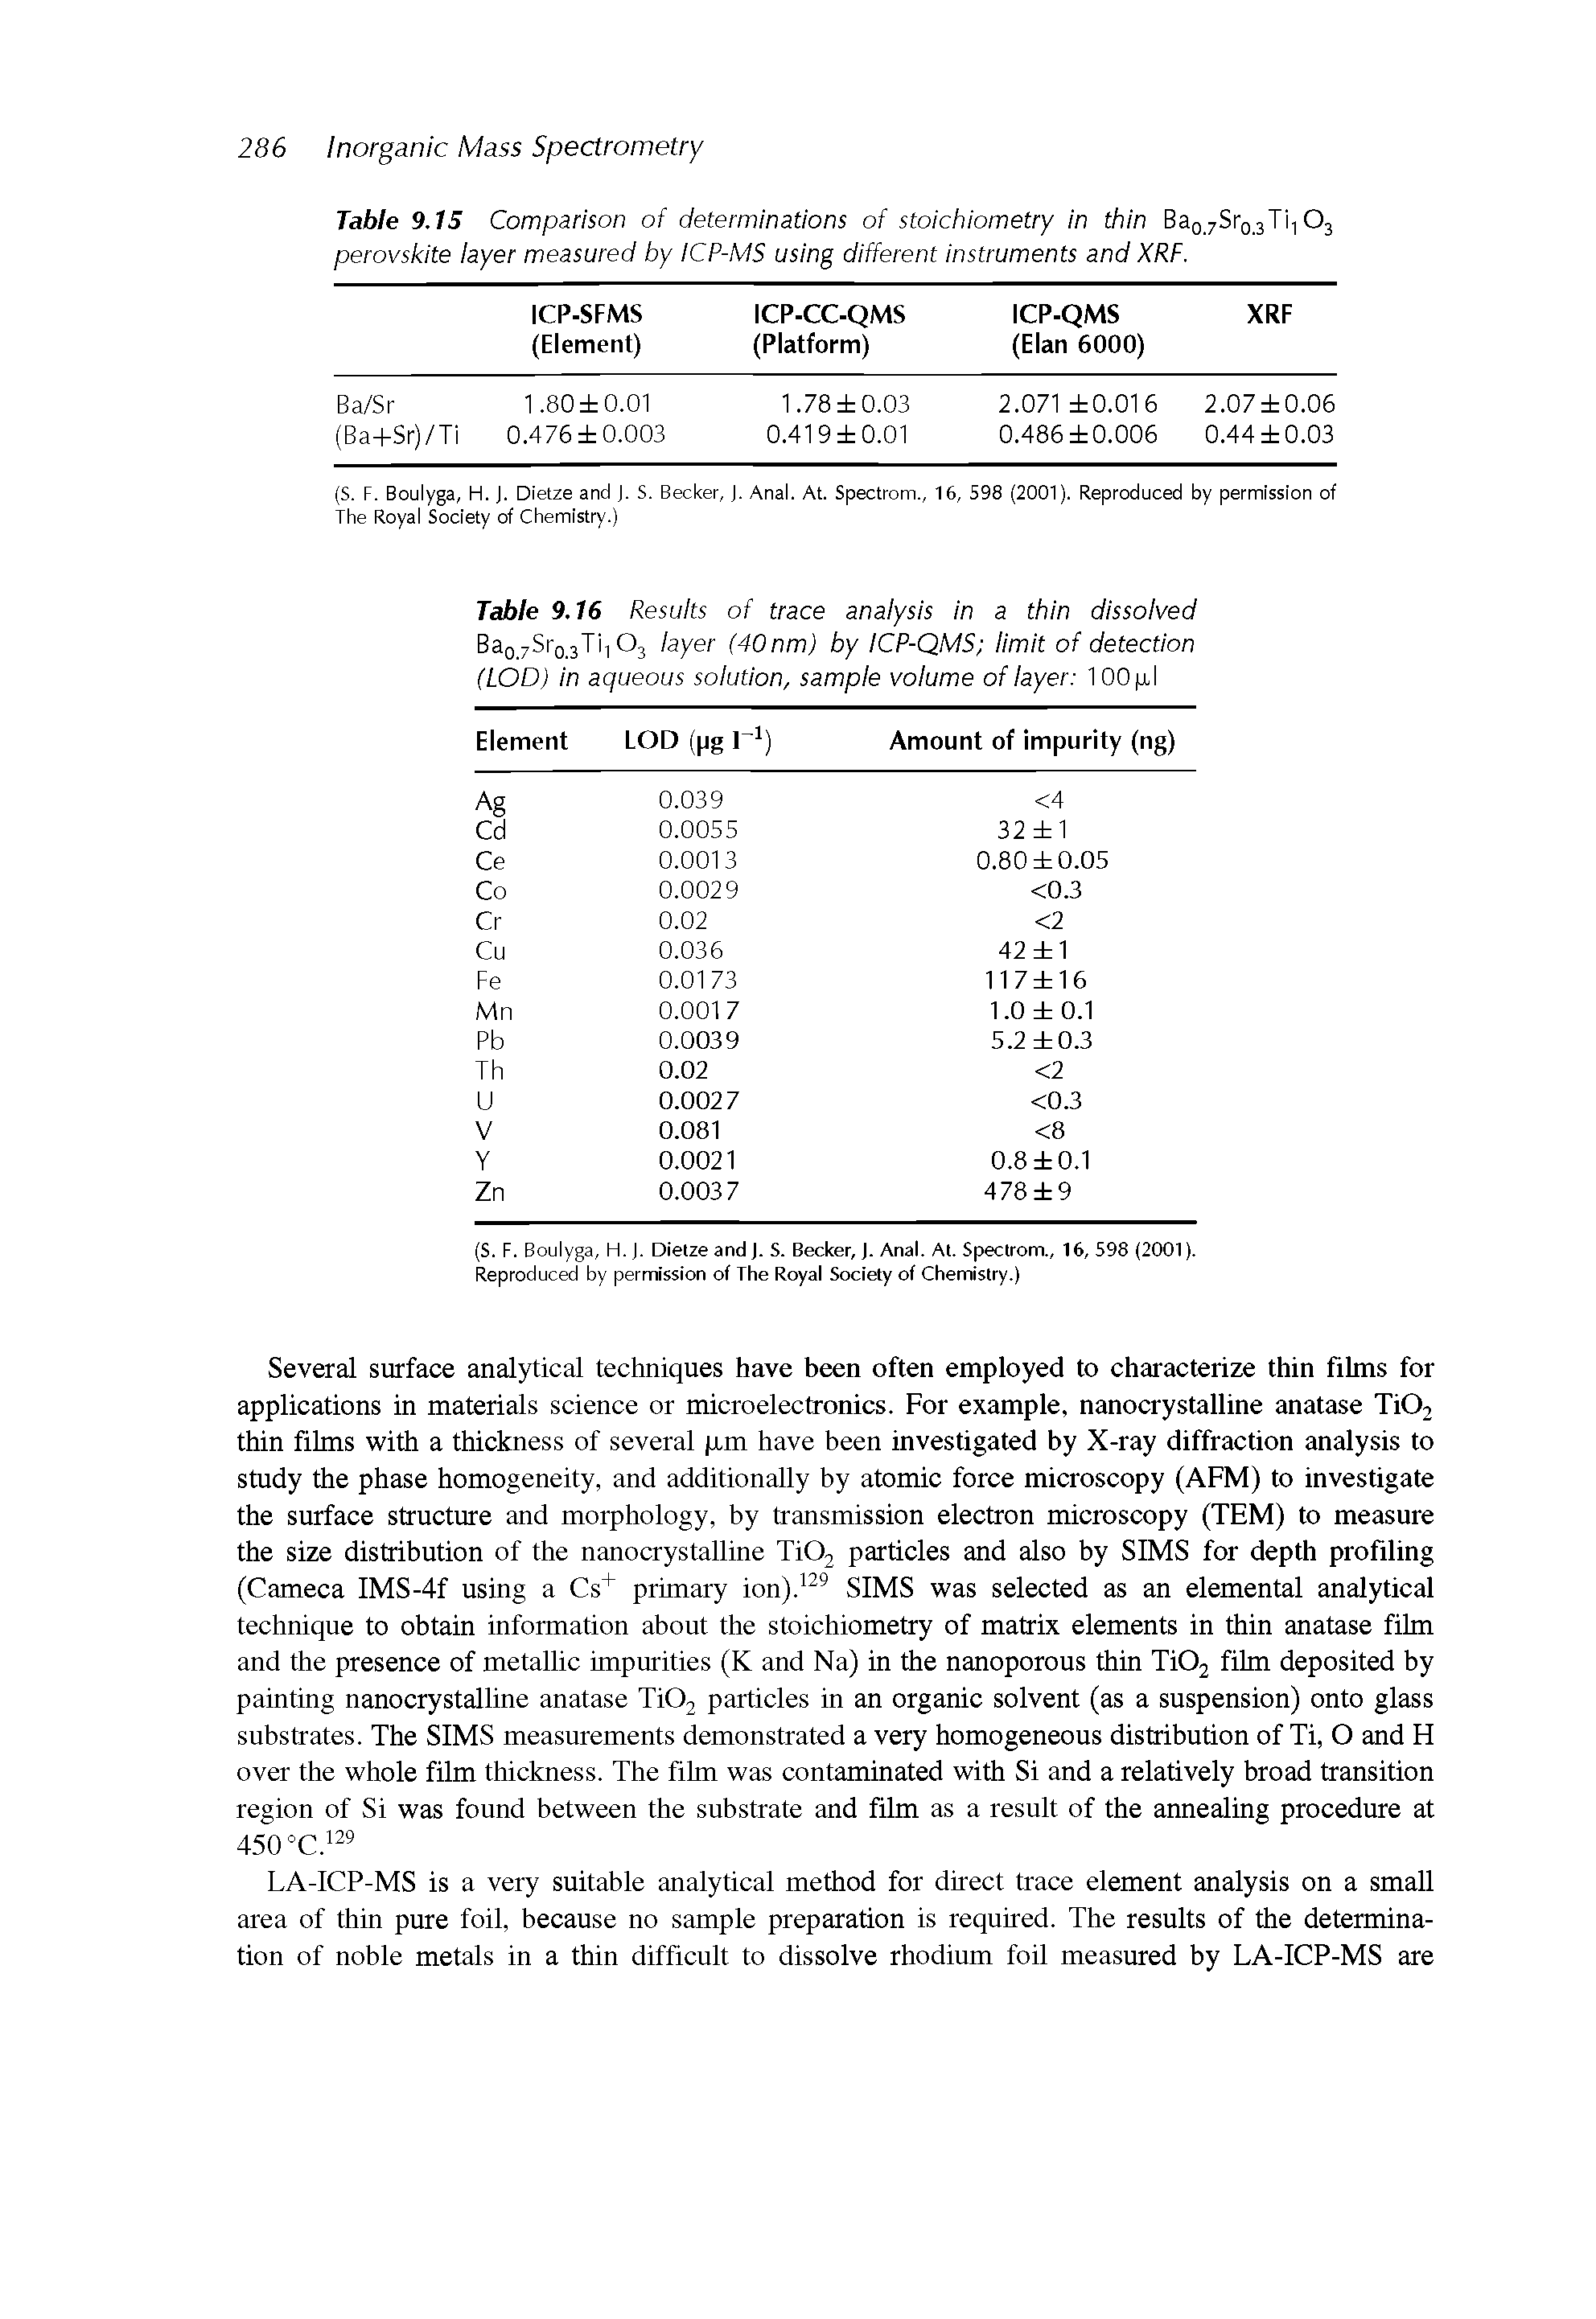 Table 9.15 Comparison of determinations of stoichiometry in thin Ba0,7Sr0 3Ti-, 03 perovskite layer measured by ICP-MS using different instruments and XRF.